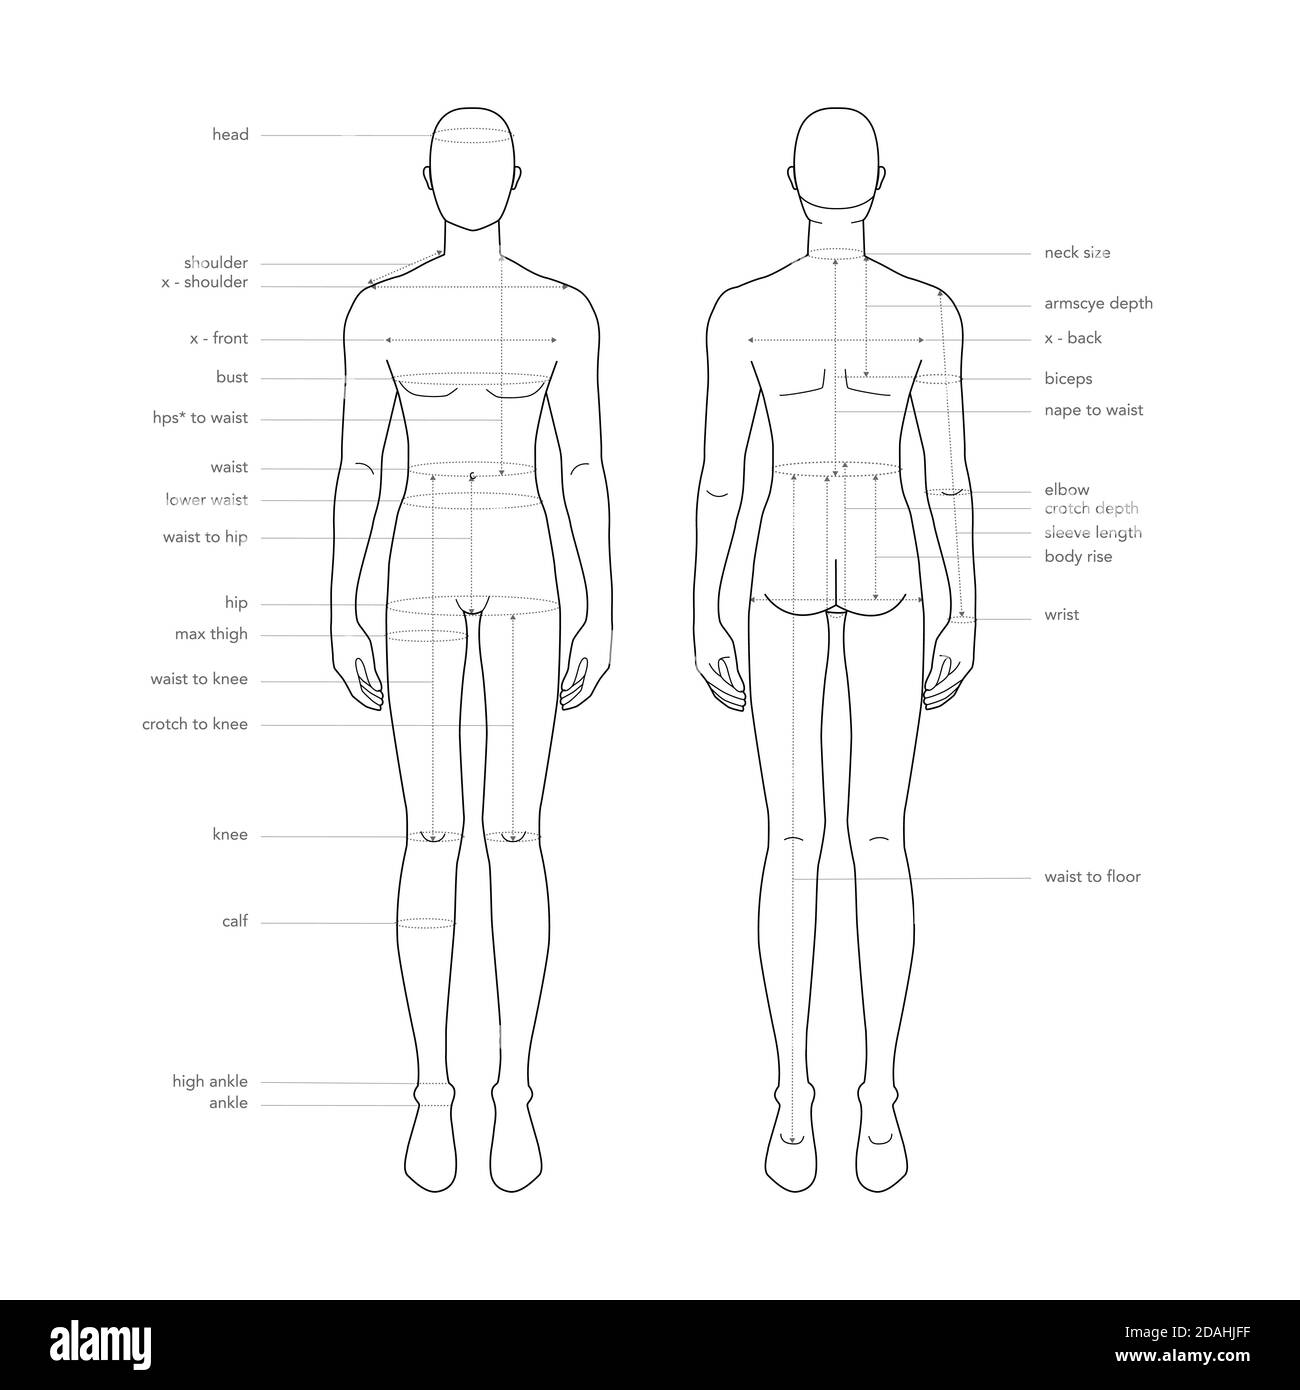 https://c8.alamy.com/comp/2DAHJFF/men-body-parts-terminology-measurements-illustration-for-clothes-and-accessories-production-fashion-male-size-chart-9-head-boy-for-site-and-online-shop-human-body-infographic-template-2DAHJFF.jpg